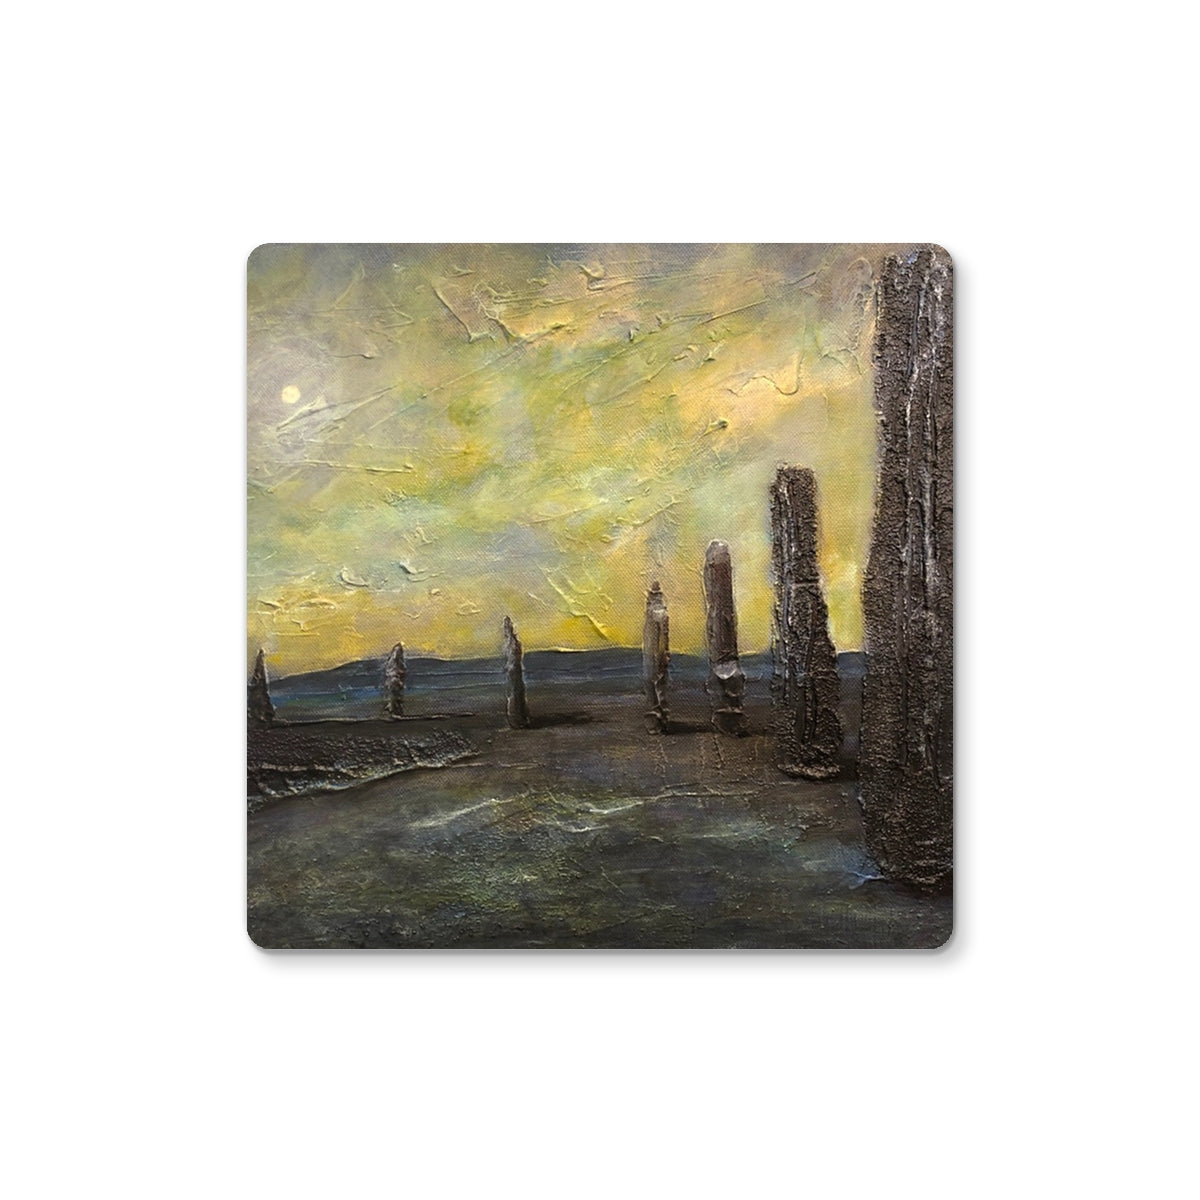 An Ethereal Ring Of Brodgar Art Gifts Coaster-Coasters-Orkney Art Gallery-6 Coasters-Paintings, Prints, Homeware, Art Gifts From Scotland By Scottish Artist Kevin Hunter